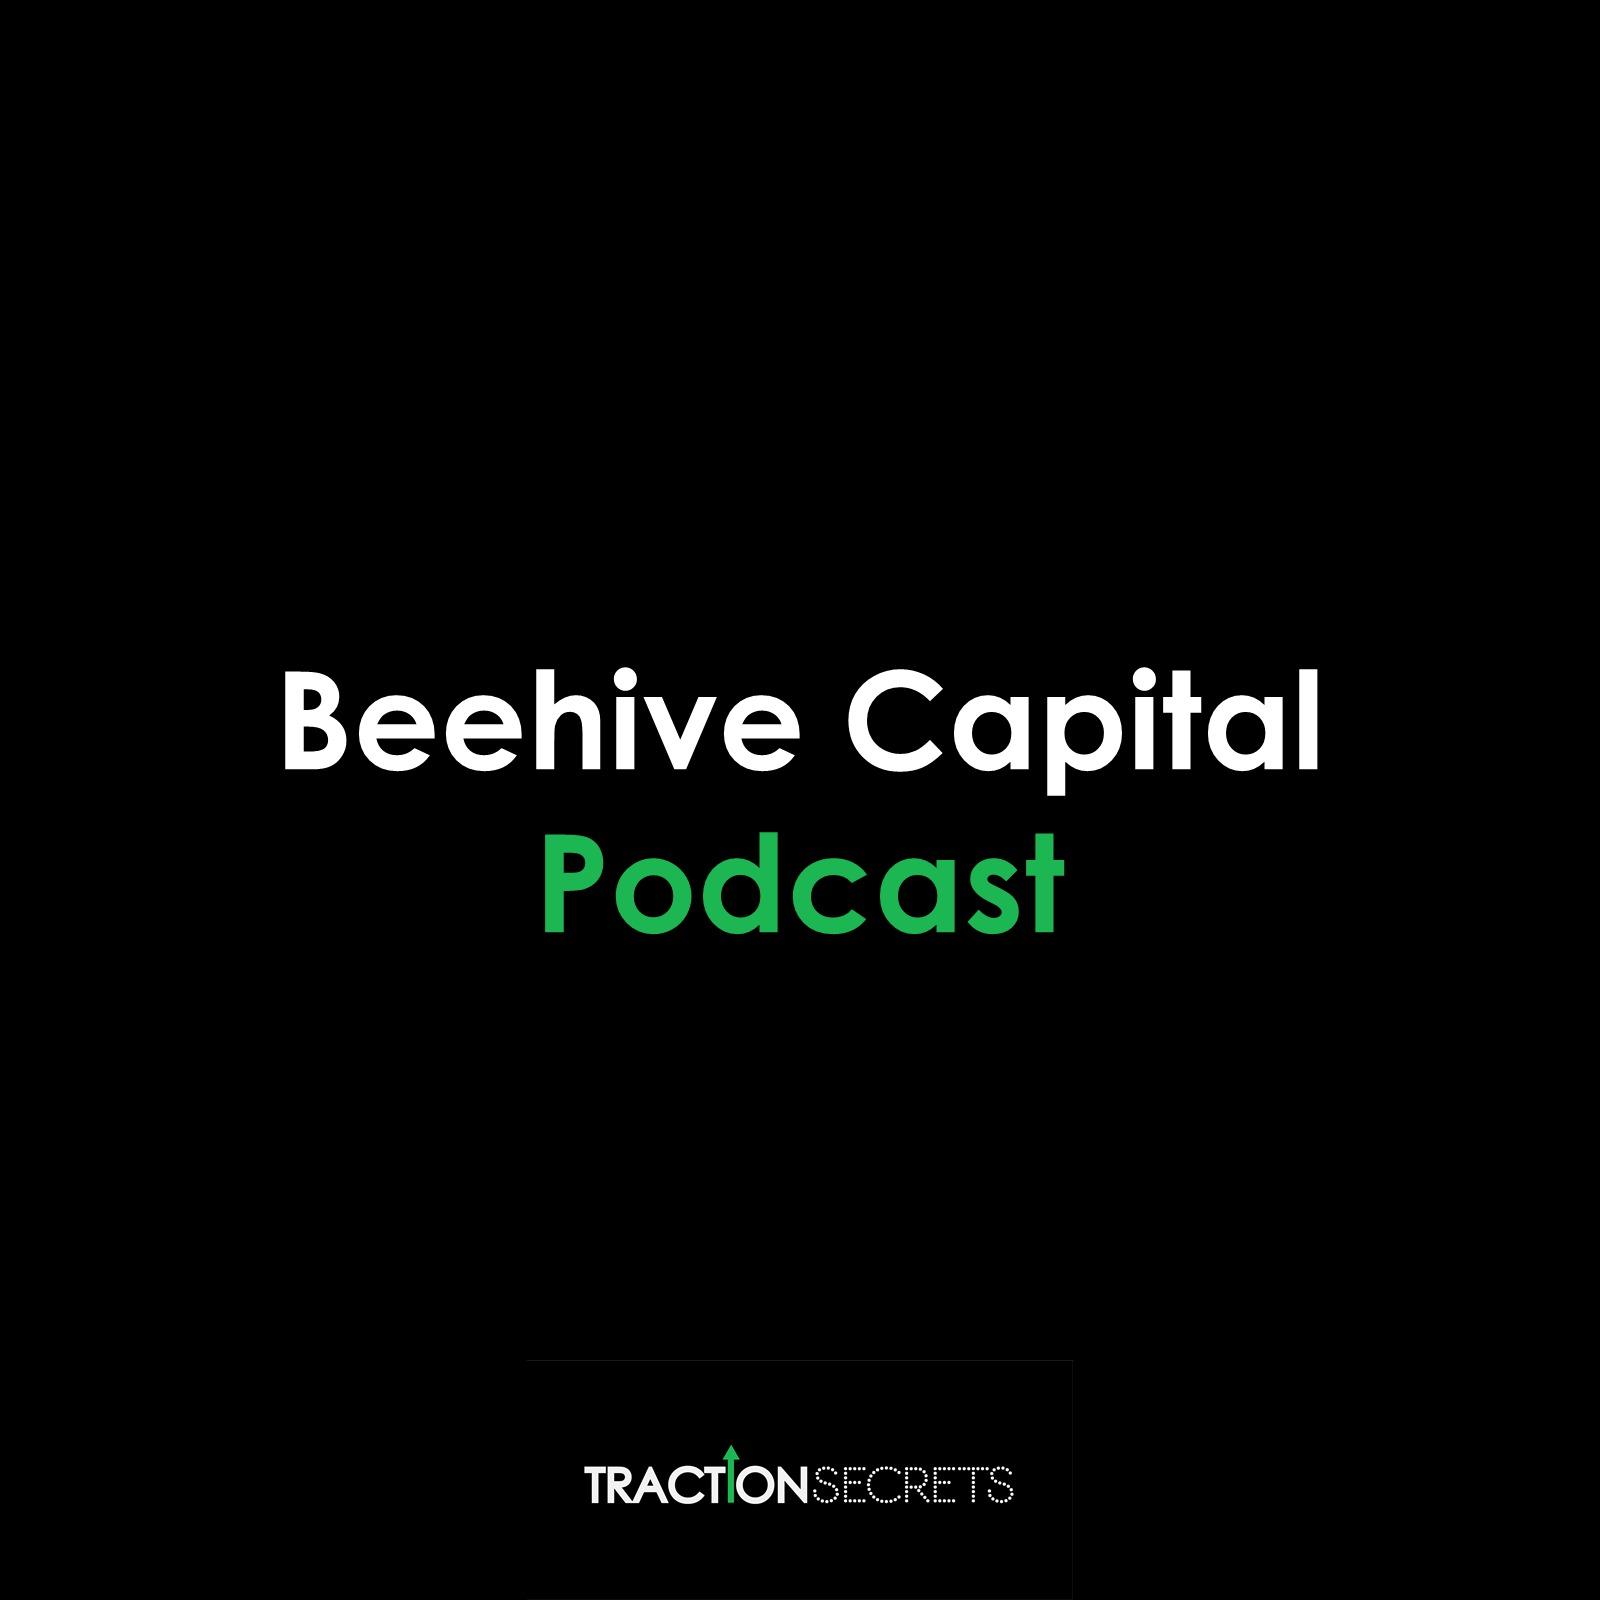 Beehive Capital Podcast